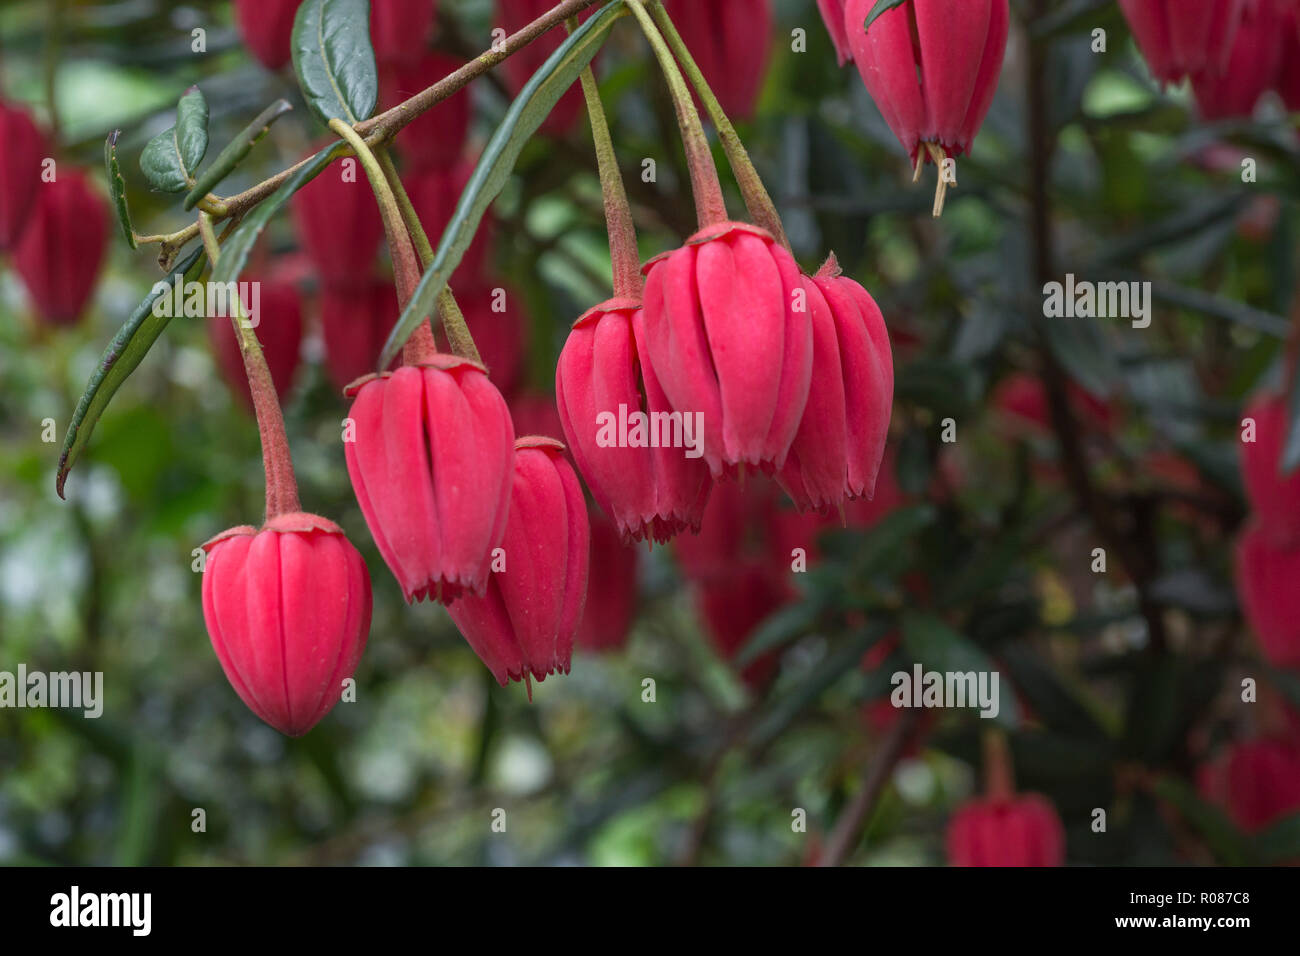 Crimson flowers of the evergreen Chilean Lantern tree / Crinodendron hookerianum (syn. Tricuspidaria hookerianum. Once used in Chilean traditional med Stock Photo